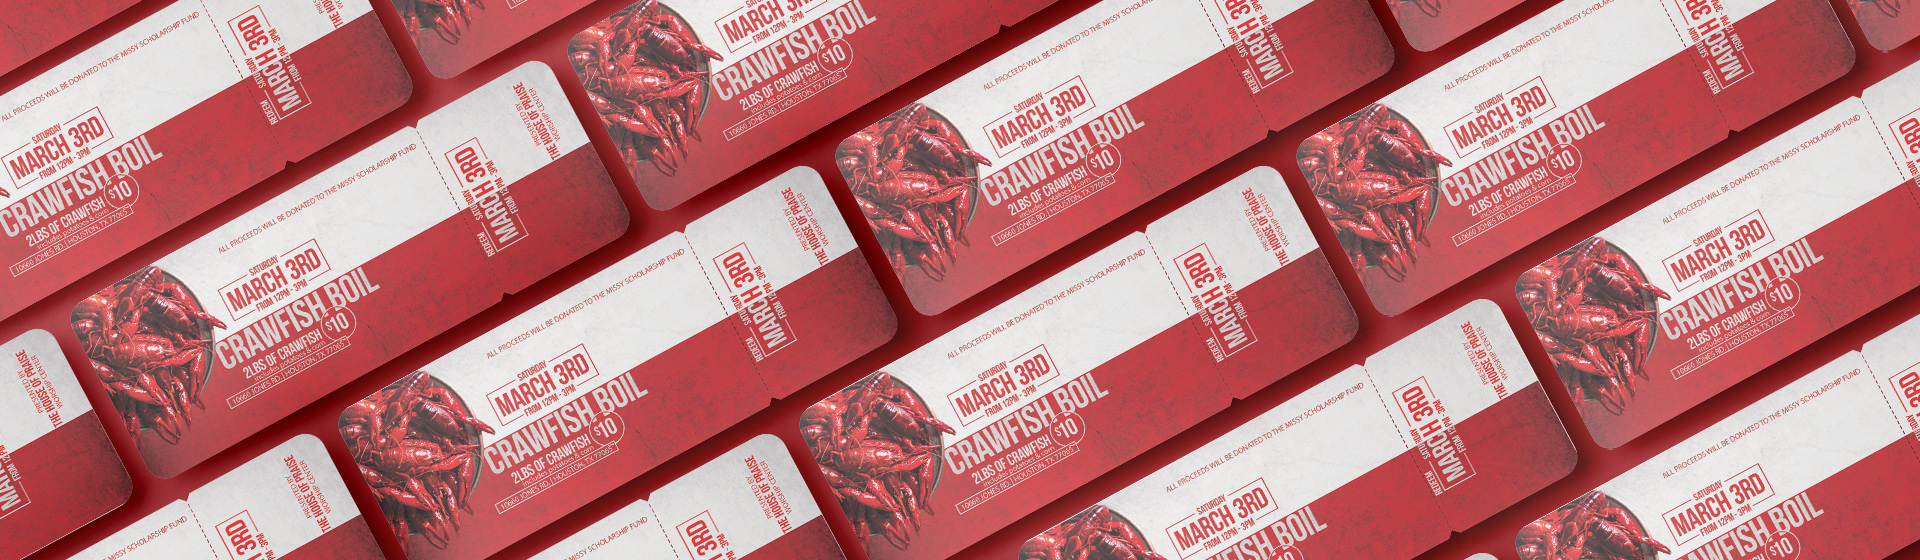 "a picture of multiple event ticket mockups for a Crawfish Boil"